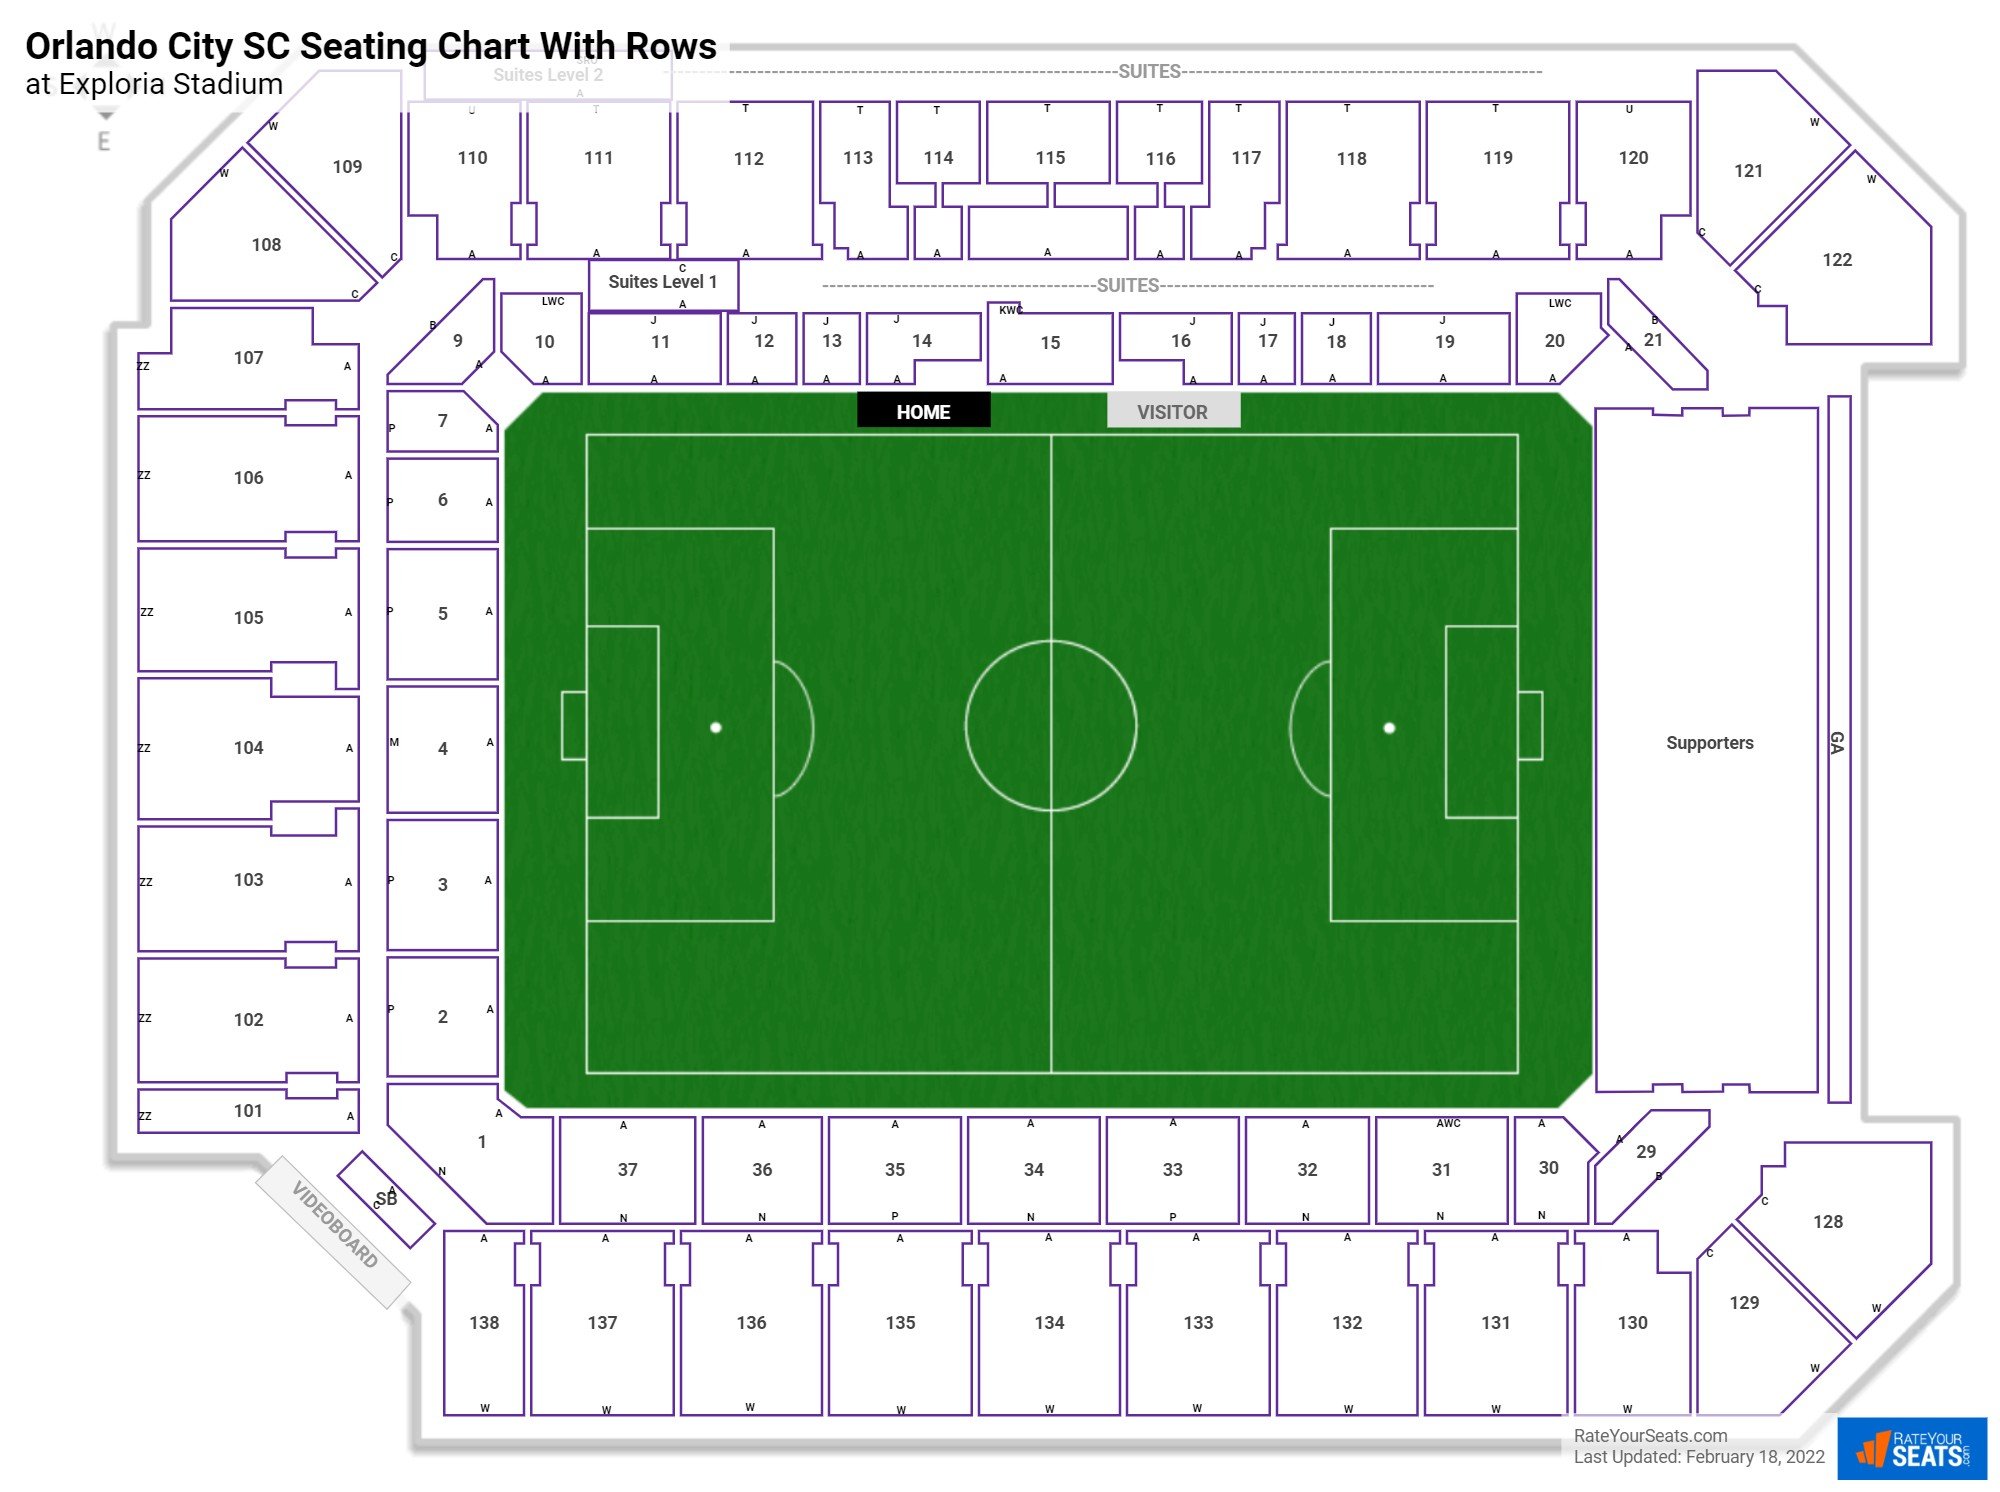 Exploria Stadium seating chart with row numbers